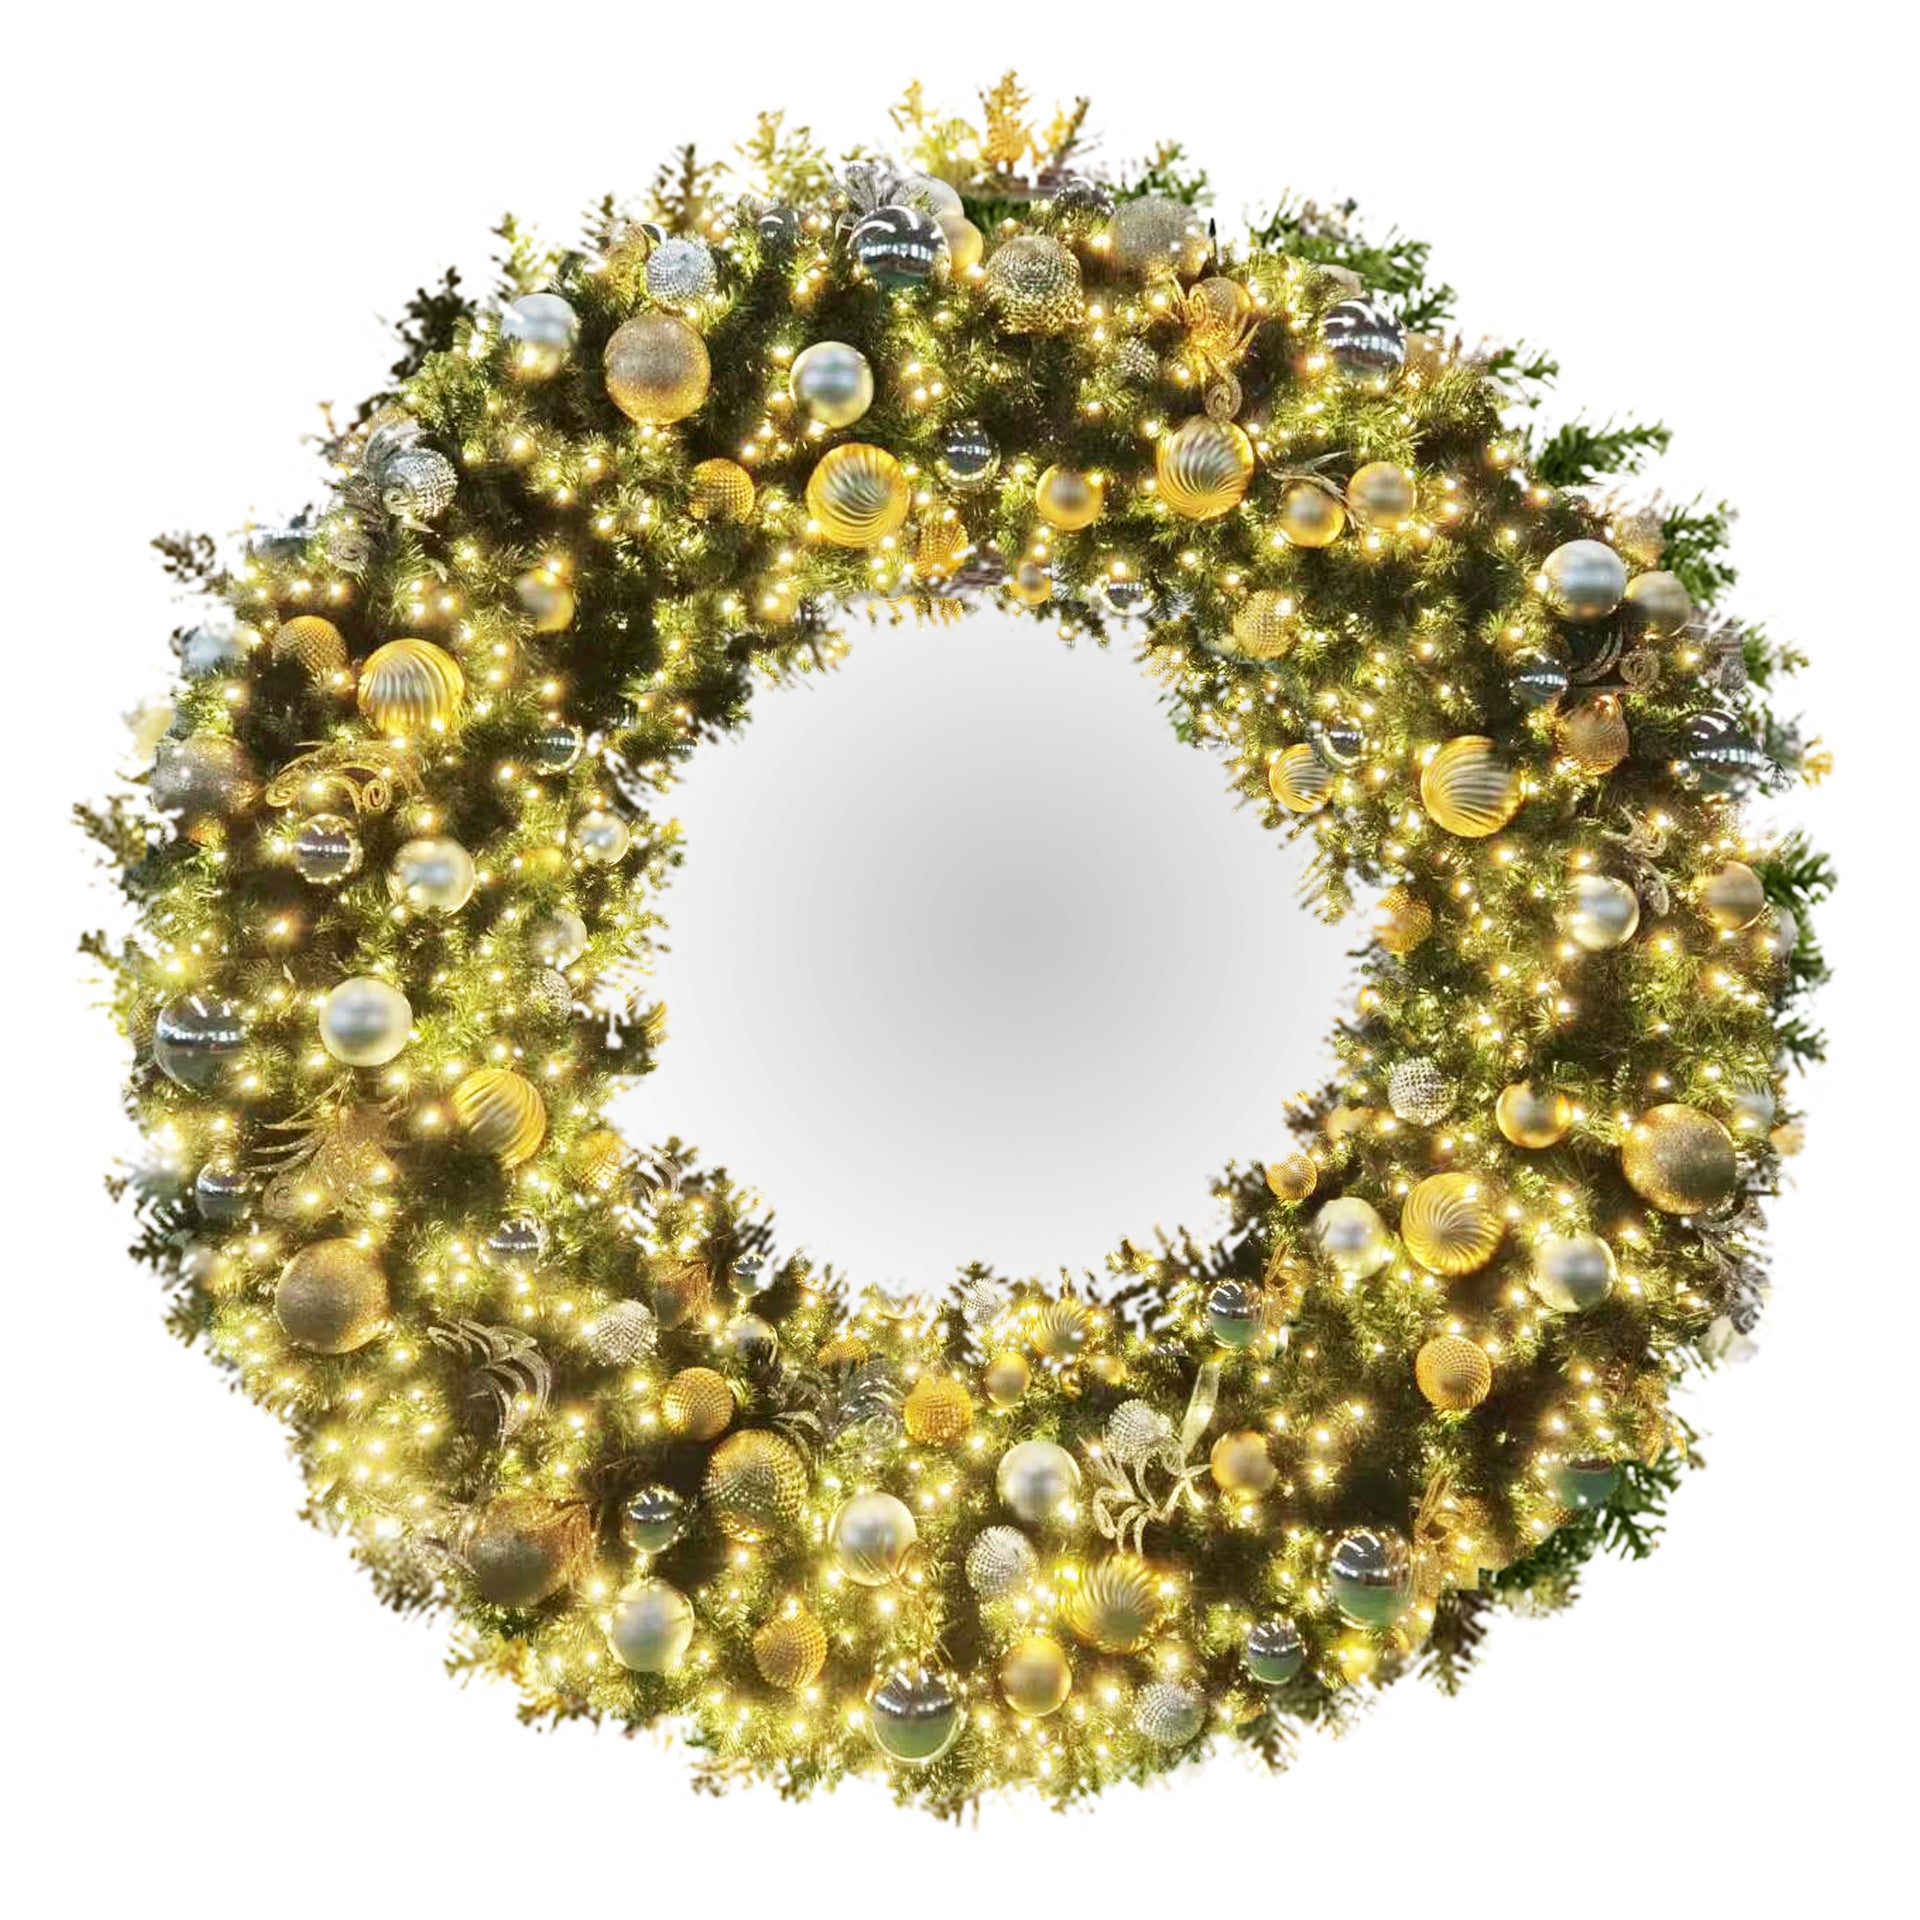 gold-and-silver-predecorated-chirstmas-lighting-and-decor-wreath-w-warm-white-lights-st-nicks-CA